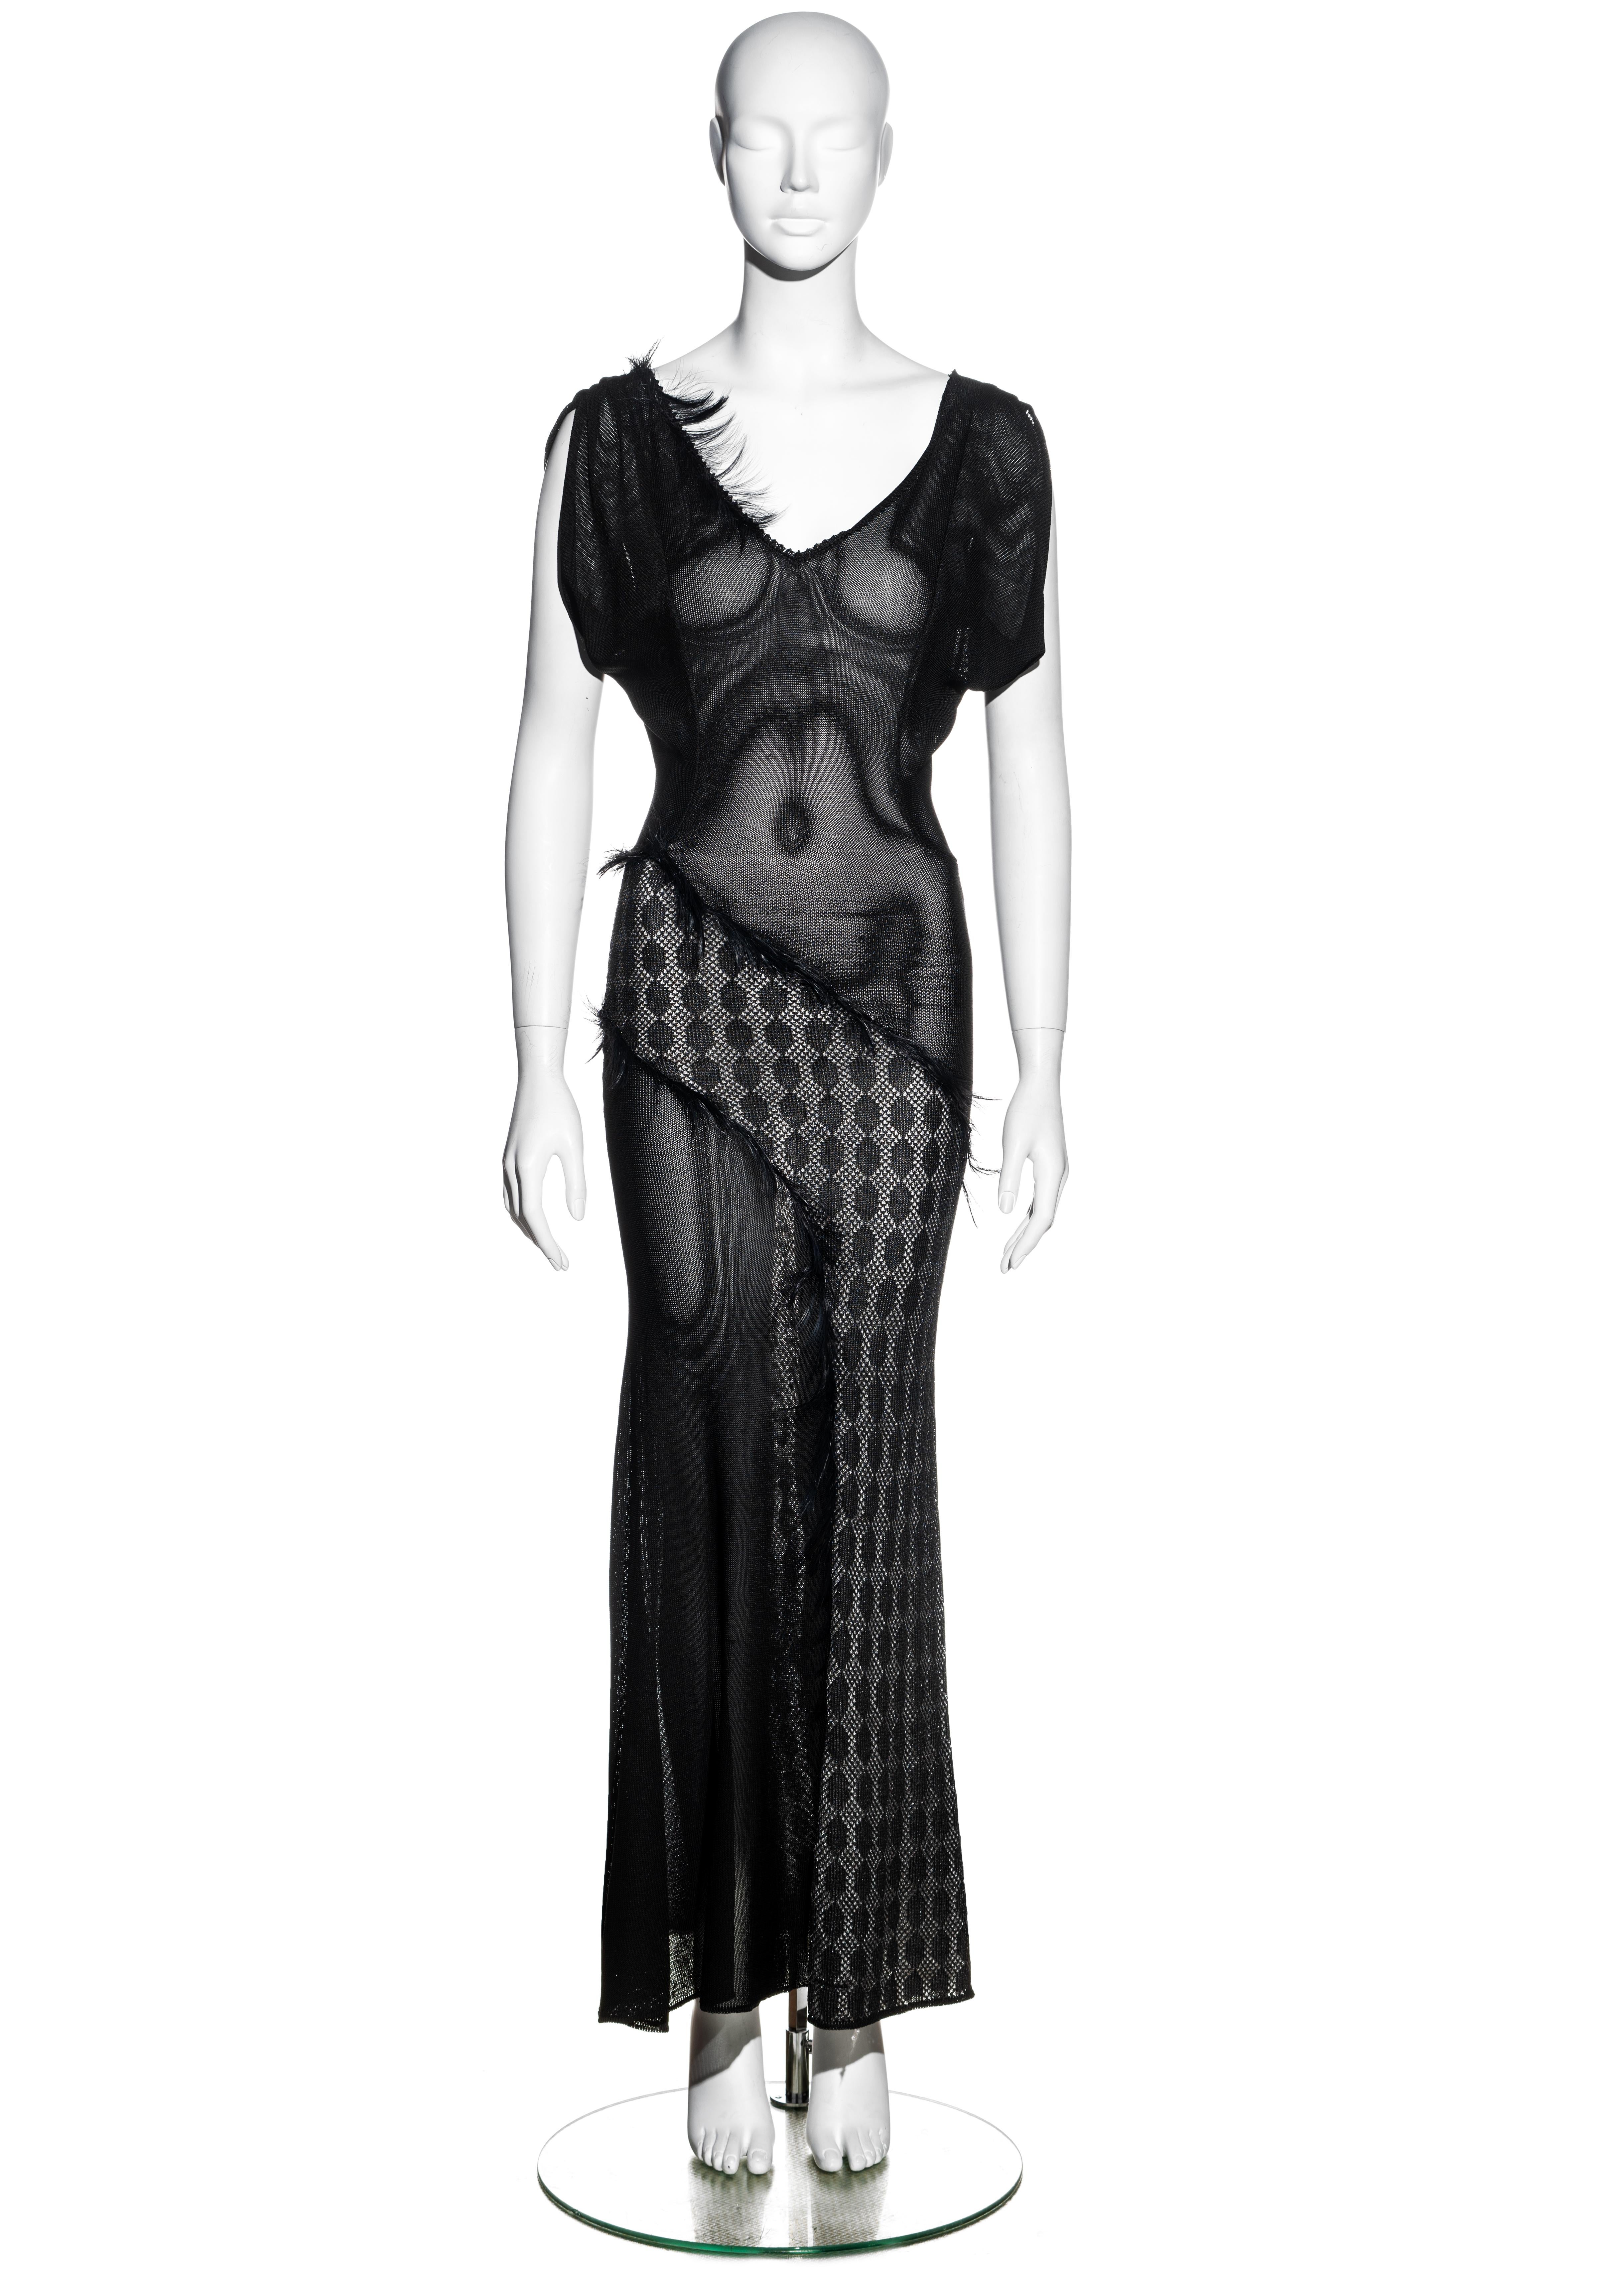 ▪ Julien Macdonald black acetate knit evening dress
▪ Bias cut 
▪ Black feather trim 
▪ Low back
▪ Check patterned panel with metallic silver underlay 
▪ Size Extra Small 
▪ Fall-Winter 1998